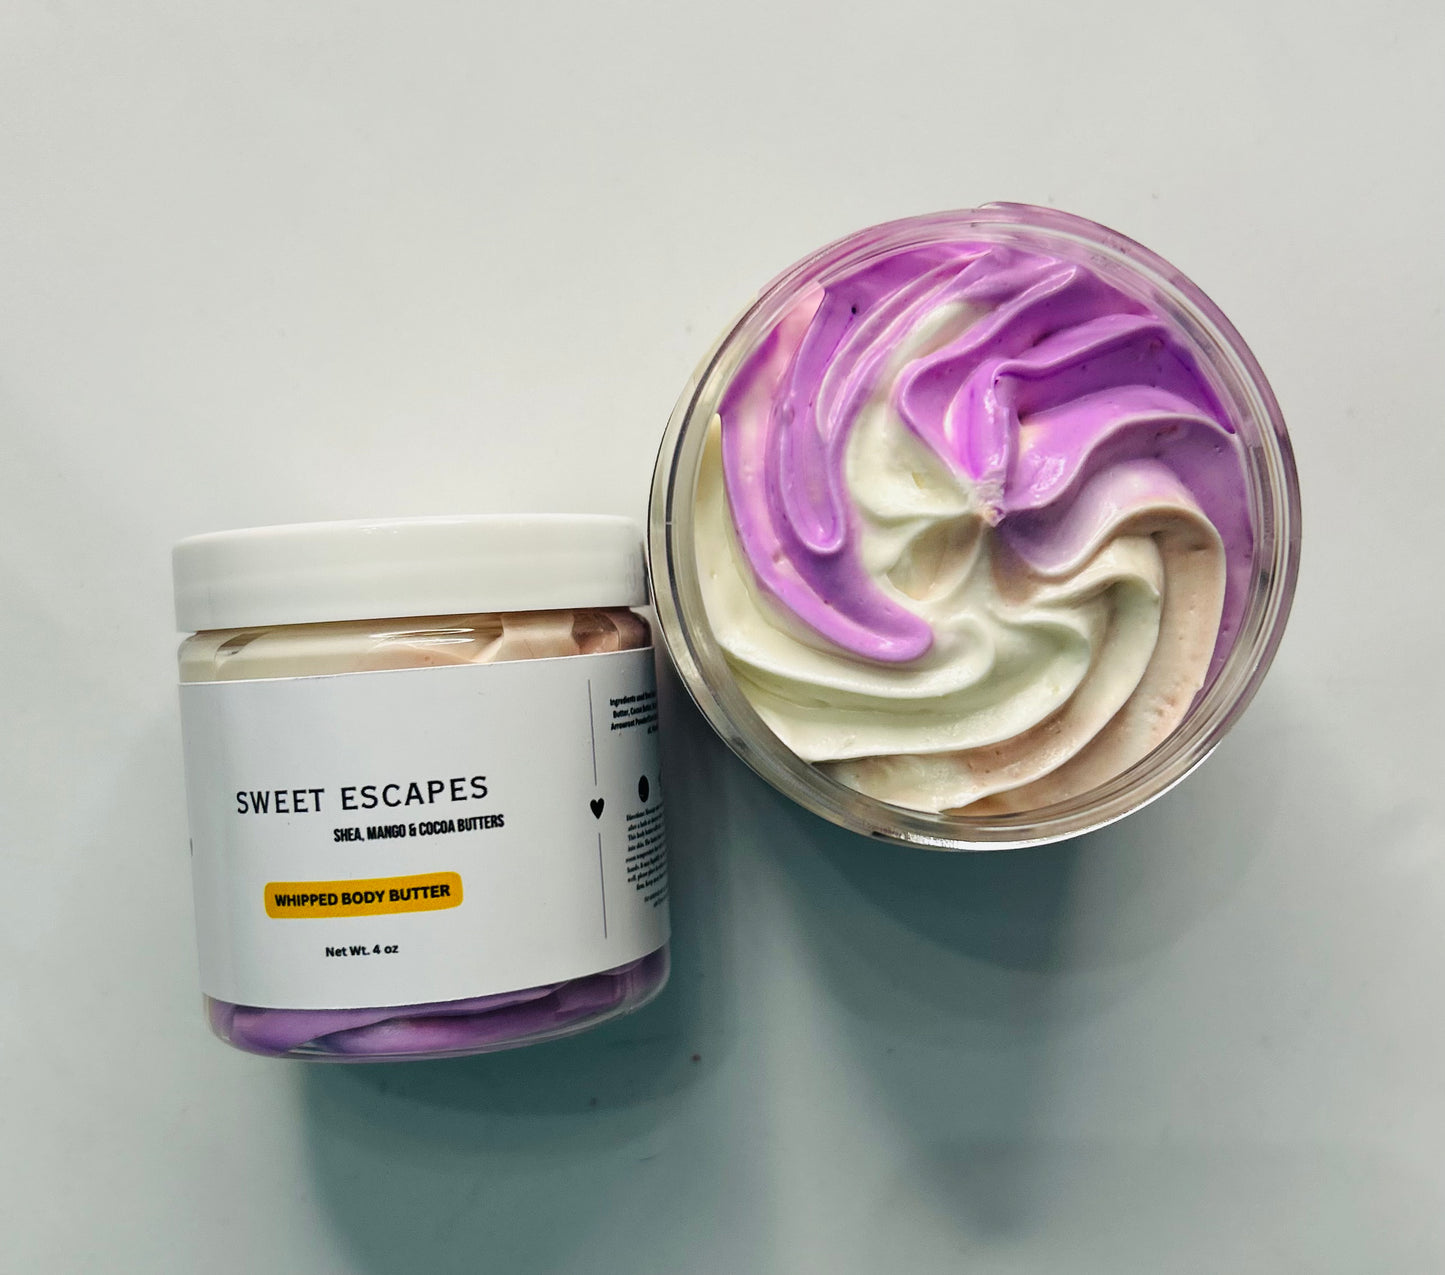 Sweet Escapes Luxuriously Rich Body Butter